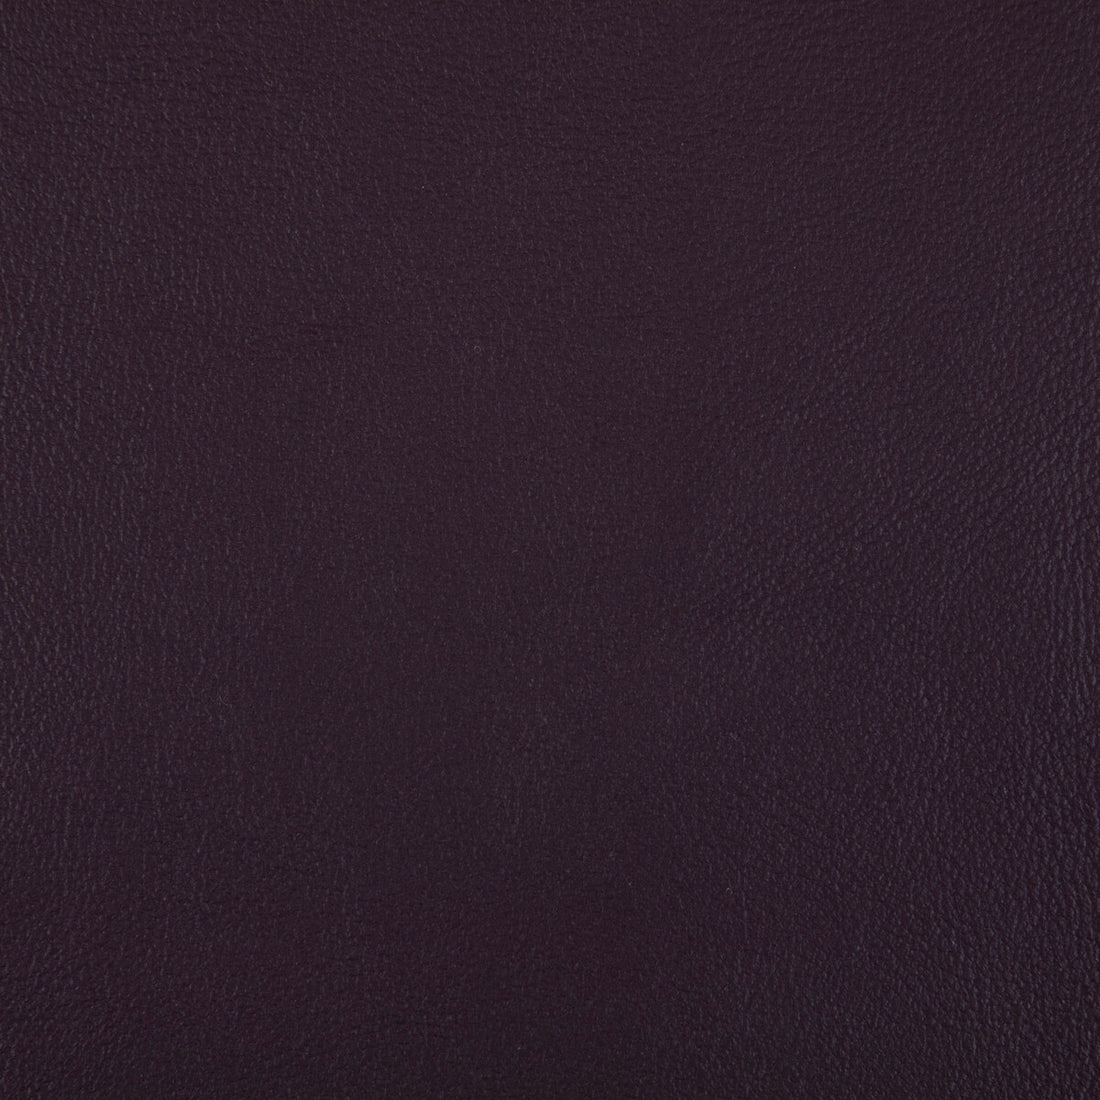 Rand fabric in plum color - pattern RAND.10.0 - by Kravet Contract